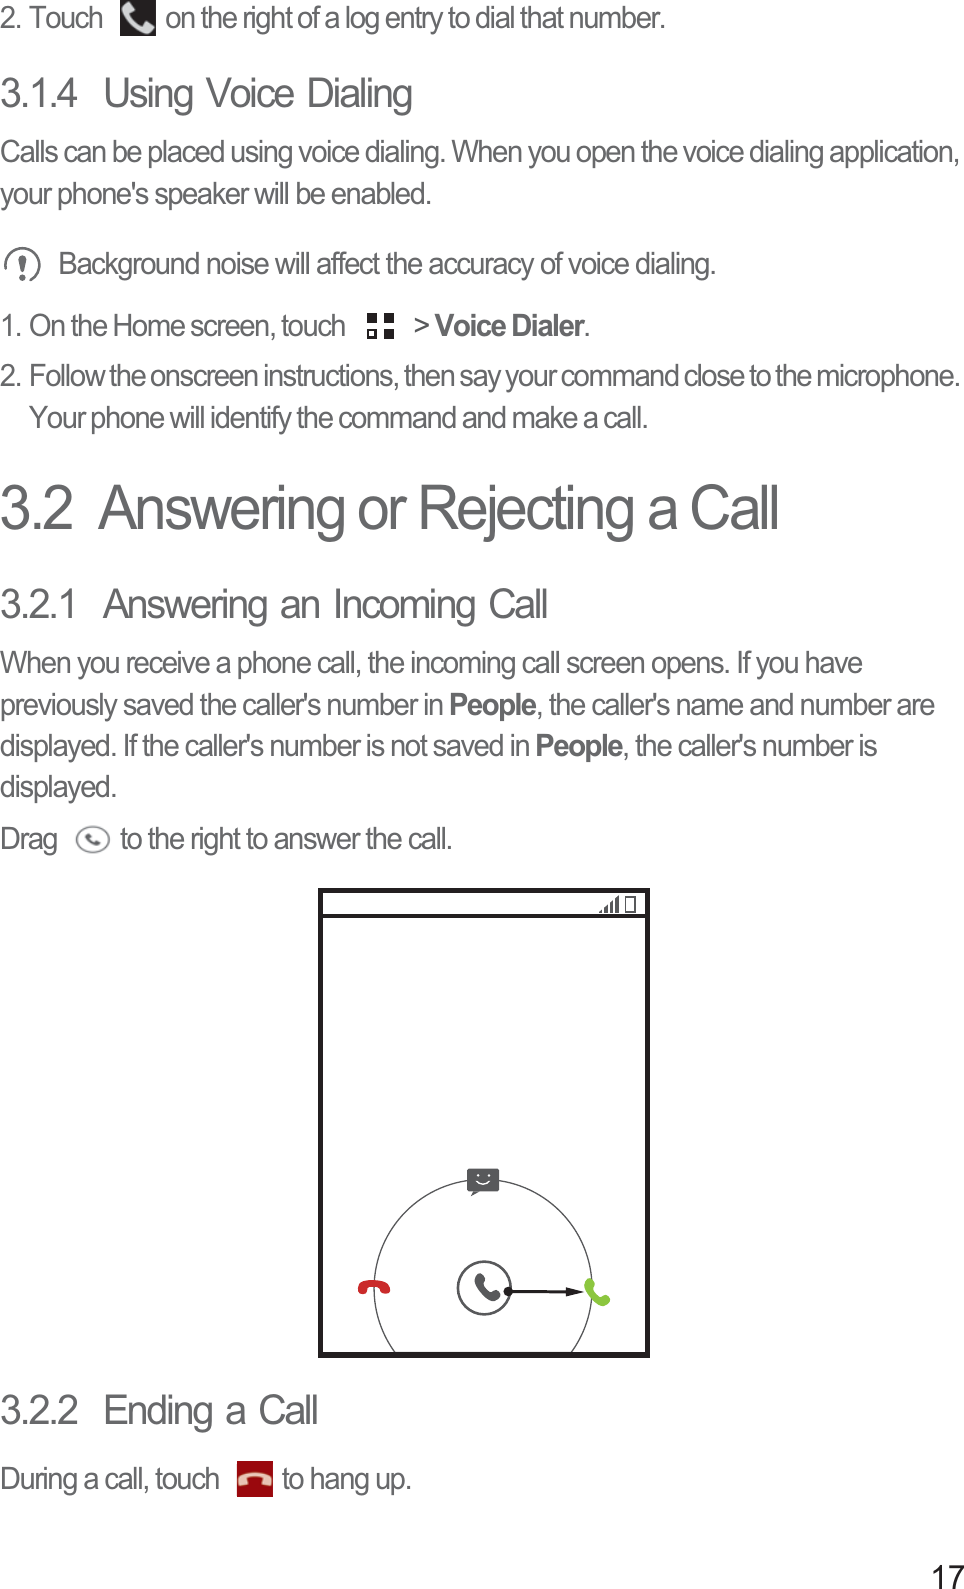 172. Touch  on the right of a log entry to dial that number. 3.1.4  Using Voice DialingCalls can be placed using voice dialing. When you open the voice dialing application, your phone&apos;s speaker will be enabled. Background noise will affect the accuracy of voice dialing. 1. On the Home screen, touch   &gt; Voice Dialer. 2. Follow the onscreen instructions, then say your command close to the microphone. Your phone will identify the command and make a call. 3.2  Answering or Rejecting a Call3.2.1  Answering an Incoming CallWhen you receive a phone call, the incoming call screen opens. If you have previously saved the caller&apos;s number in People, the caller&apos;s name and number are displayed. If the caller&apos;s number is not saved in People, the caller&apos;s number is displayed.Drag  to the right to answer the call.3.2.2  Ending a CallDuring a call, touch  to hang up.